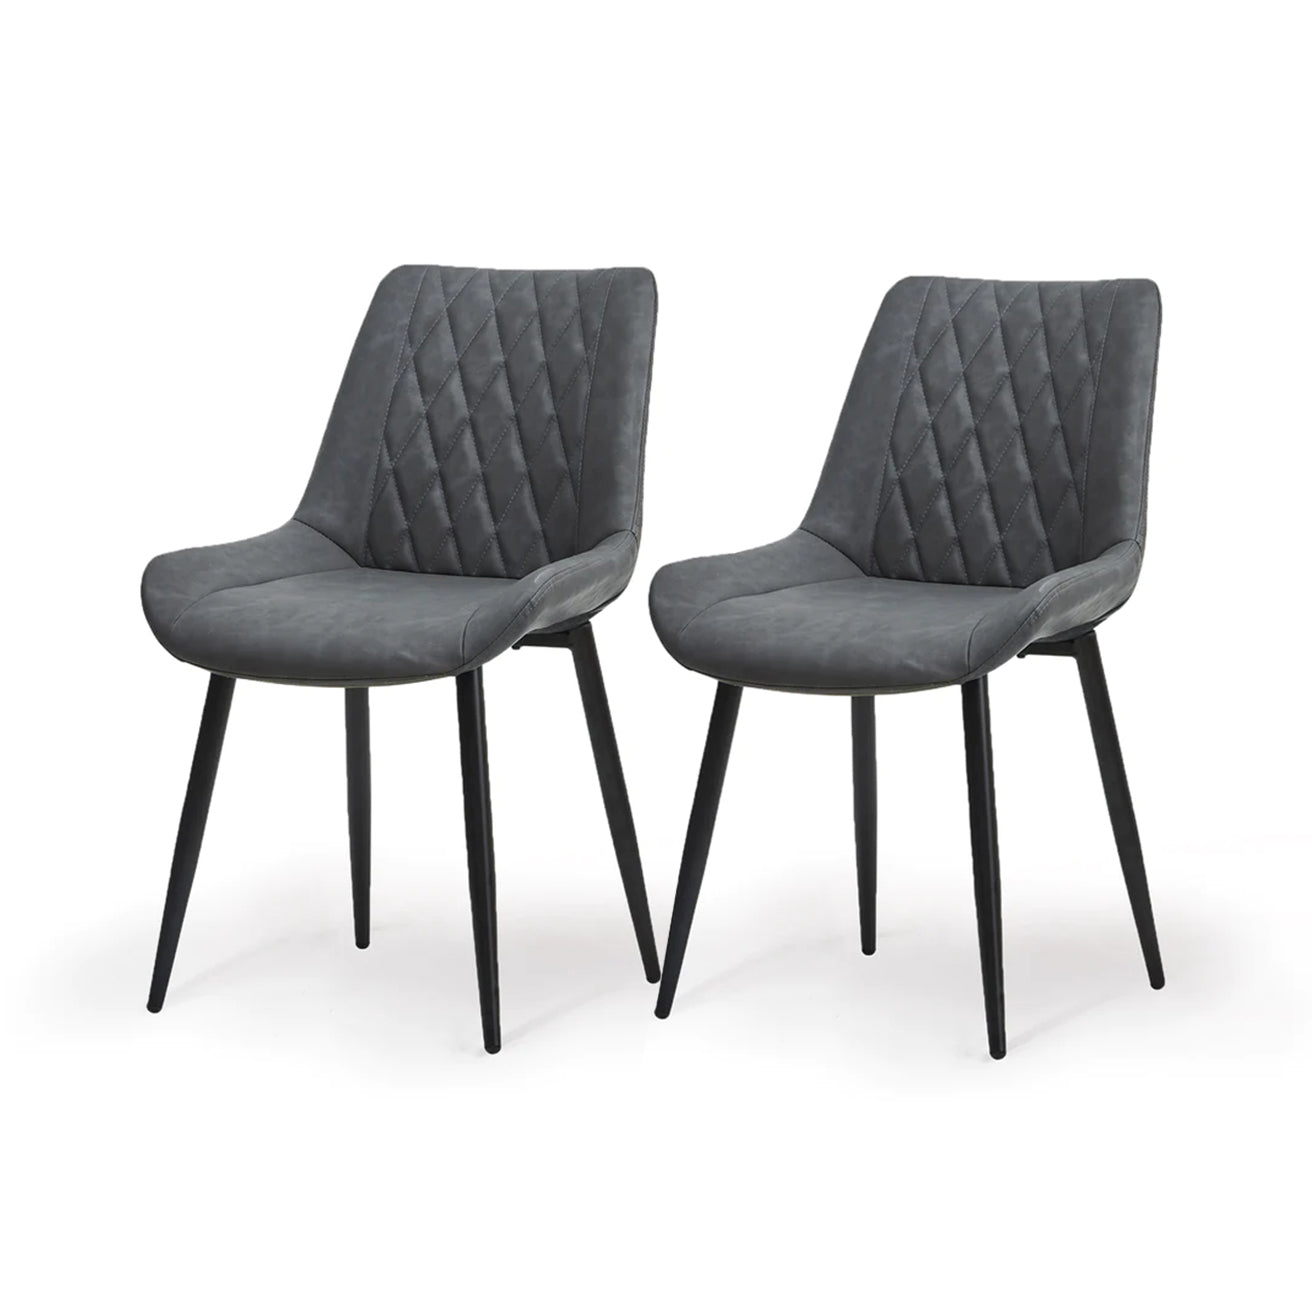 Jarvis Diamond Dining Chairs [Set of 2] [Pu Leather]